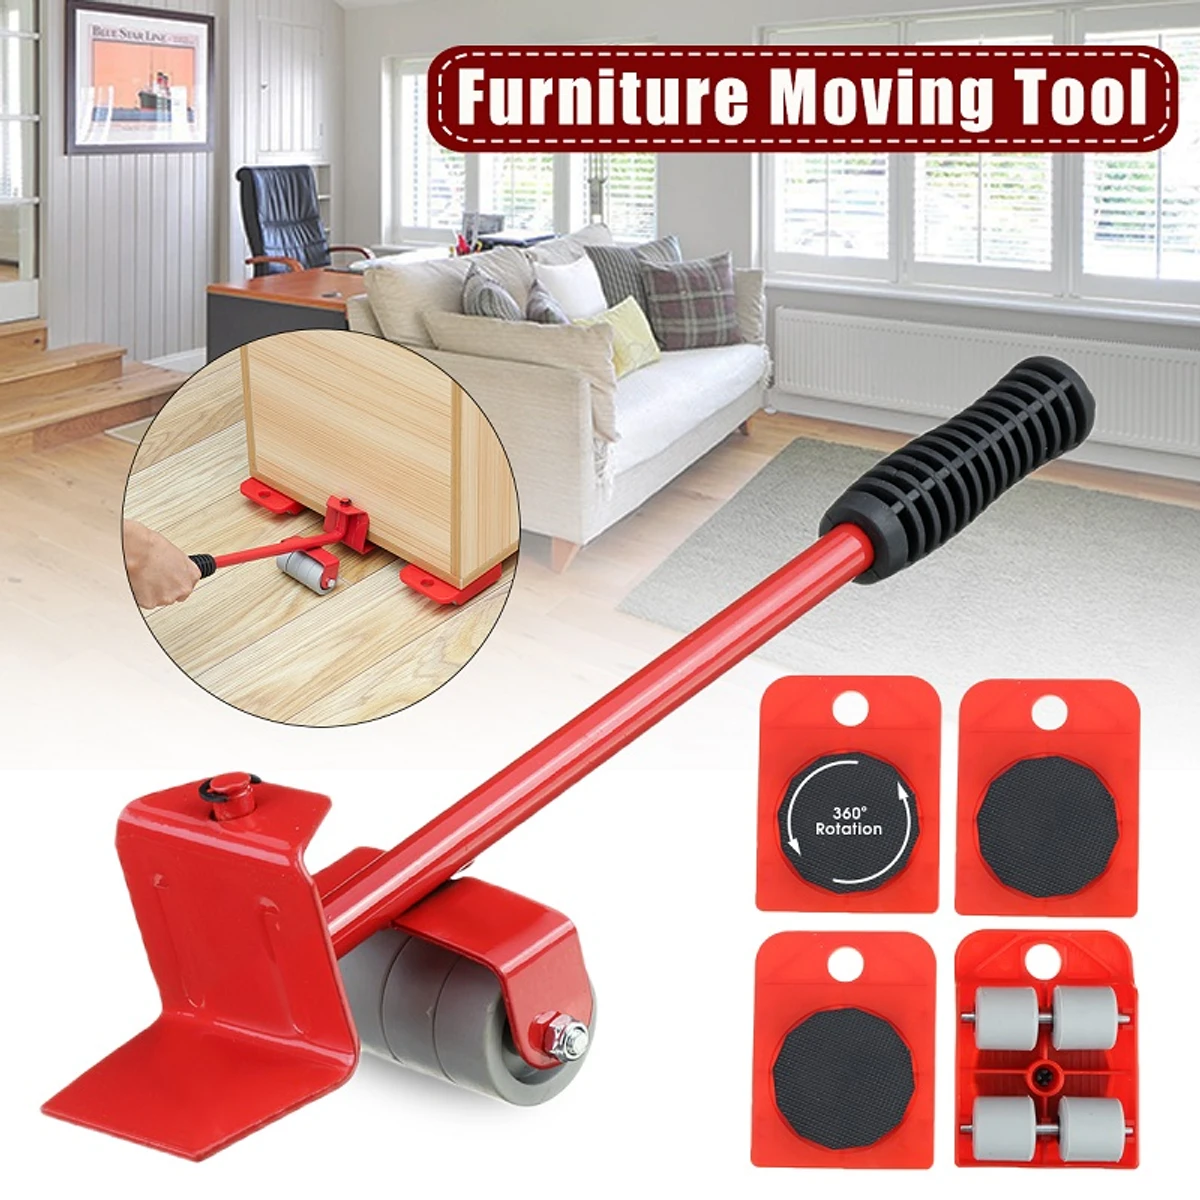 Furniture Easy Moving Tool Set, Heavy Furniture Moving & Lifting System